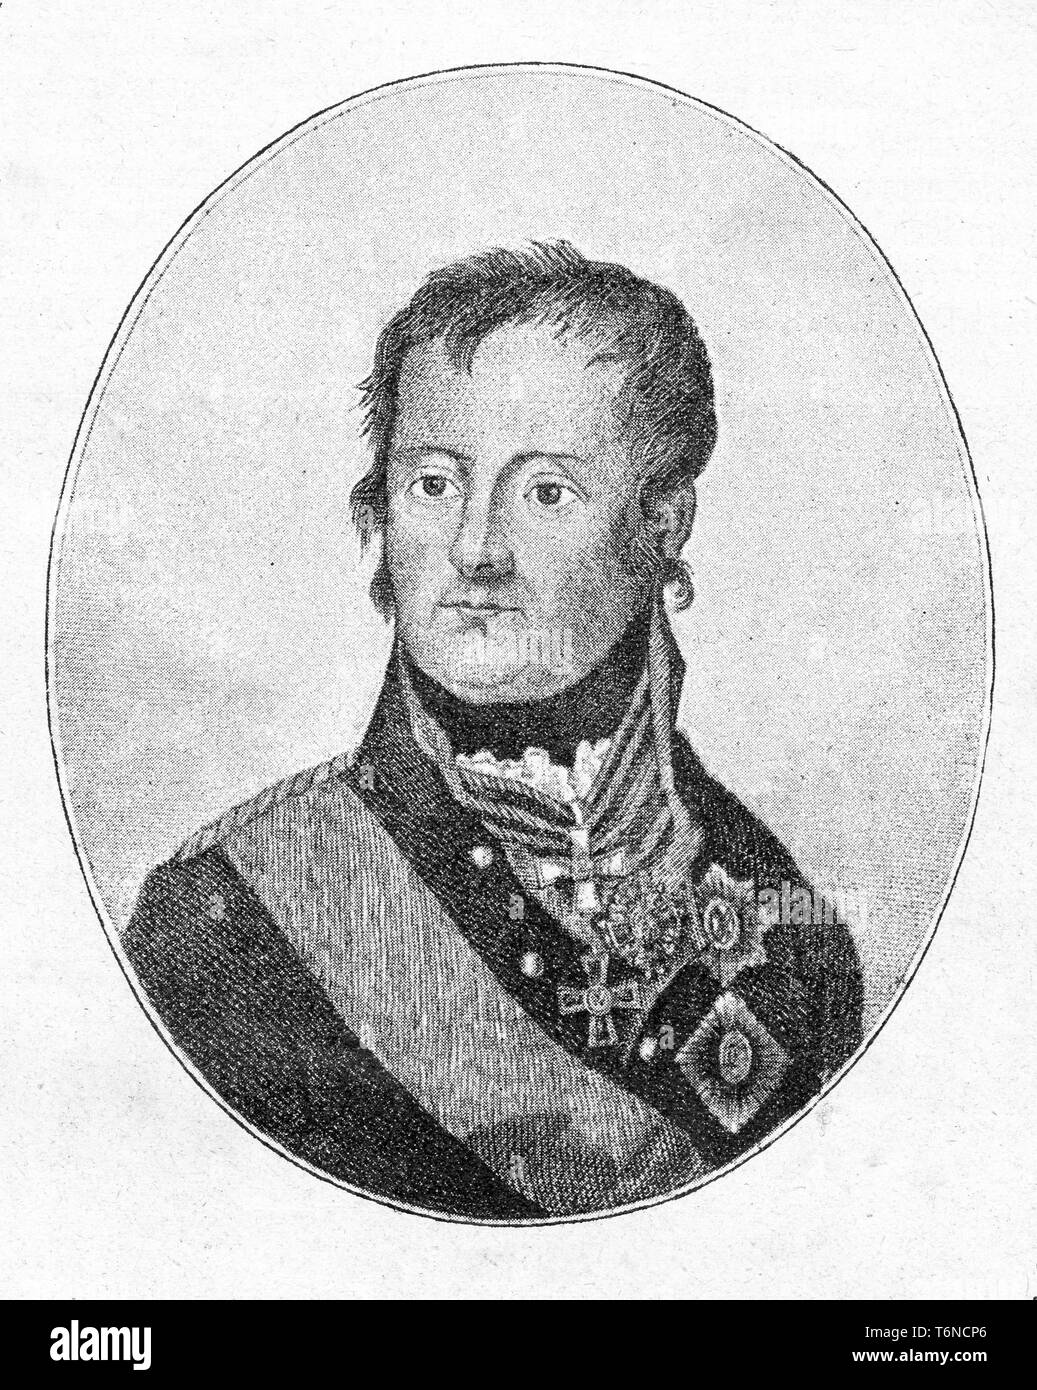 Levin August Gottlieb Theophil Graf von Bennigsen , German general in the service of the Russian Empire. Digital improved reproduction from Illustrated overview of the life of mankind in the 19th century, 1901 edition, Marx publishing house, St. Petersburg. Stock Photo